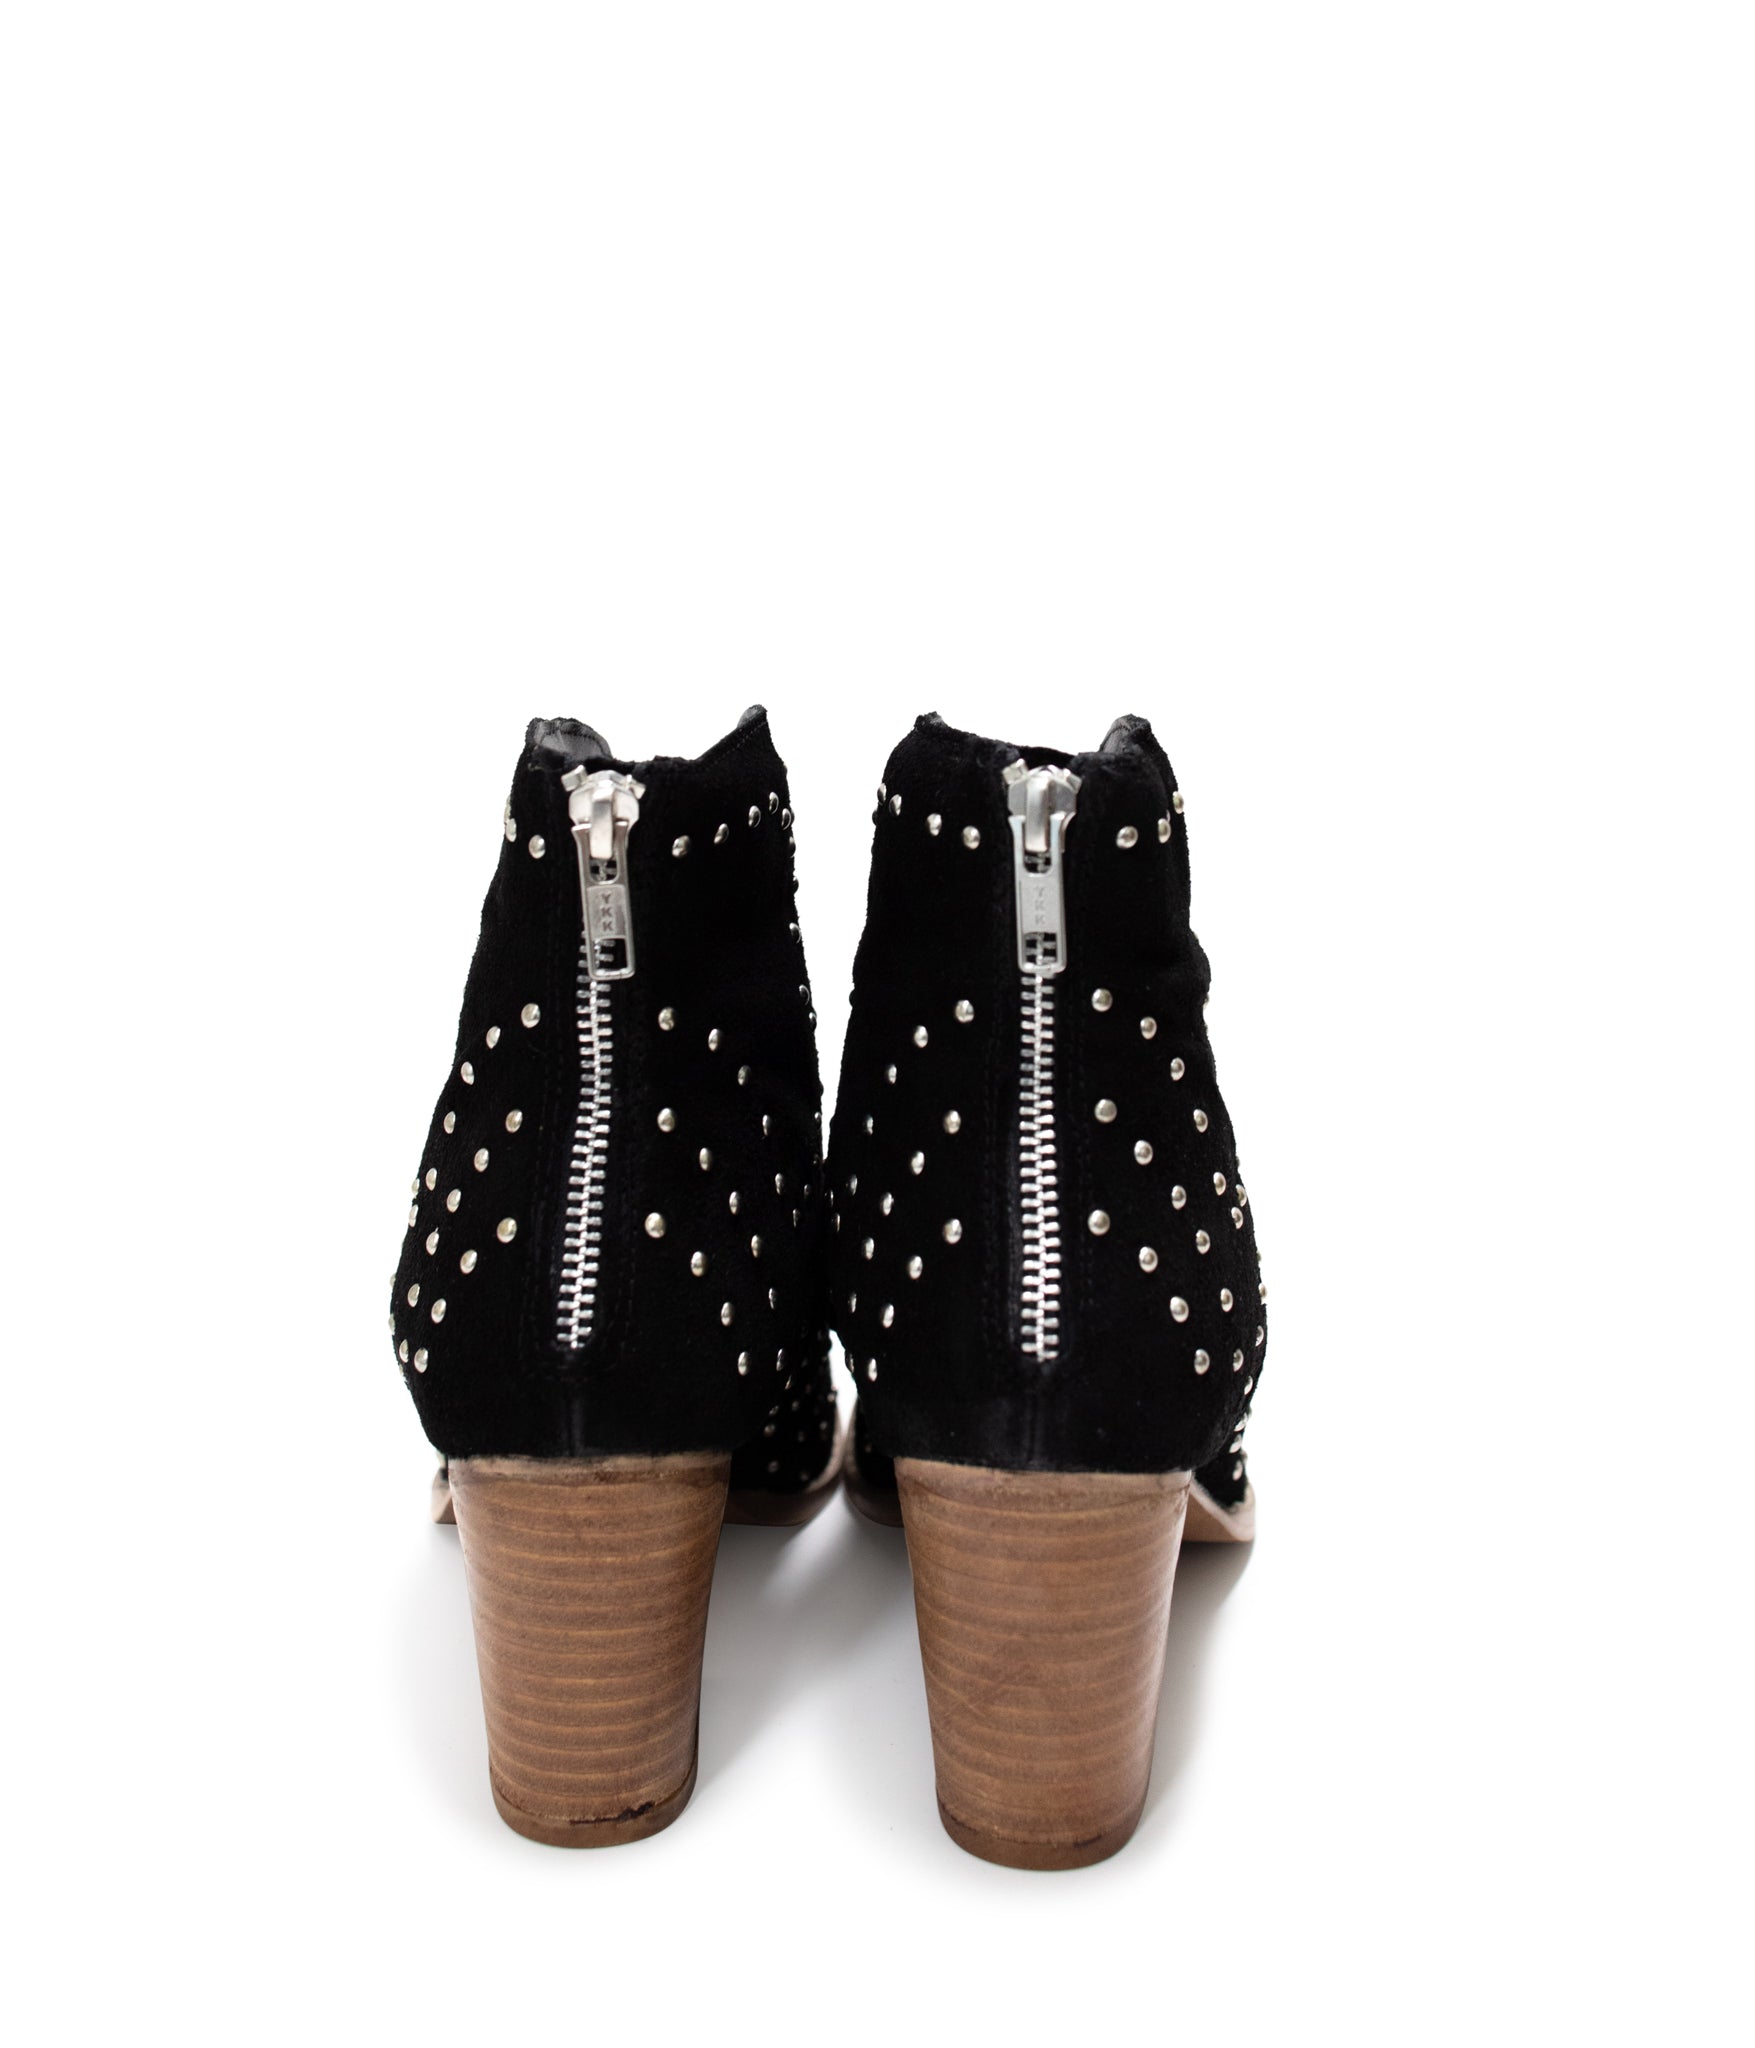 Twilight Studded Heeled Ankle Boot in Black